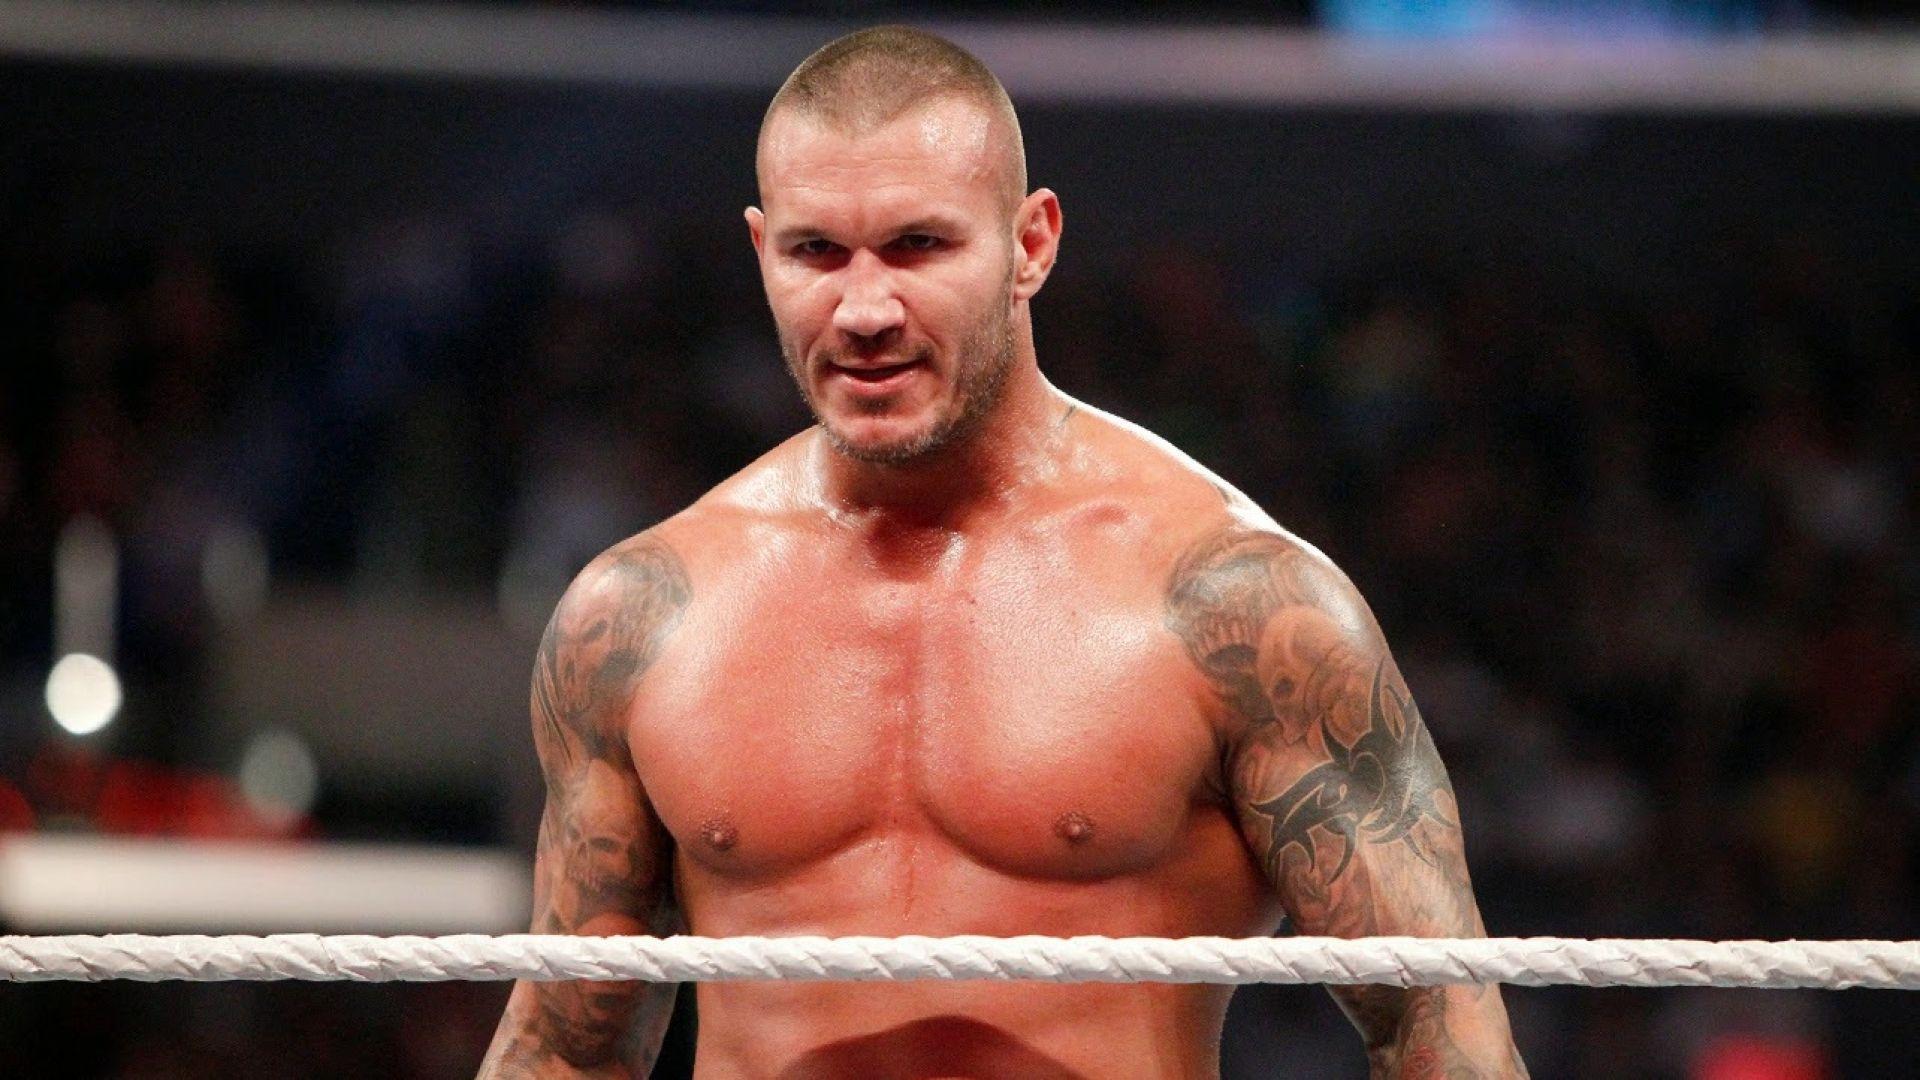 Wallpaper HD Wwe Randy Orton Smiley Faces Fresh With Bmw Car Image